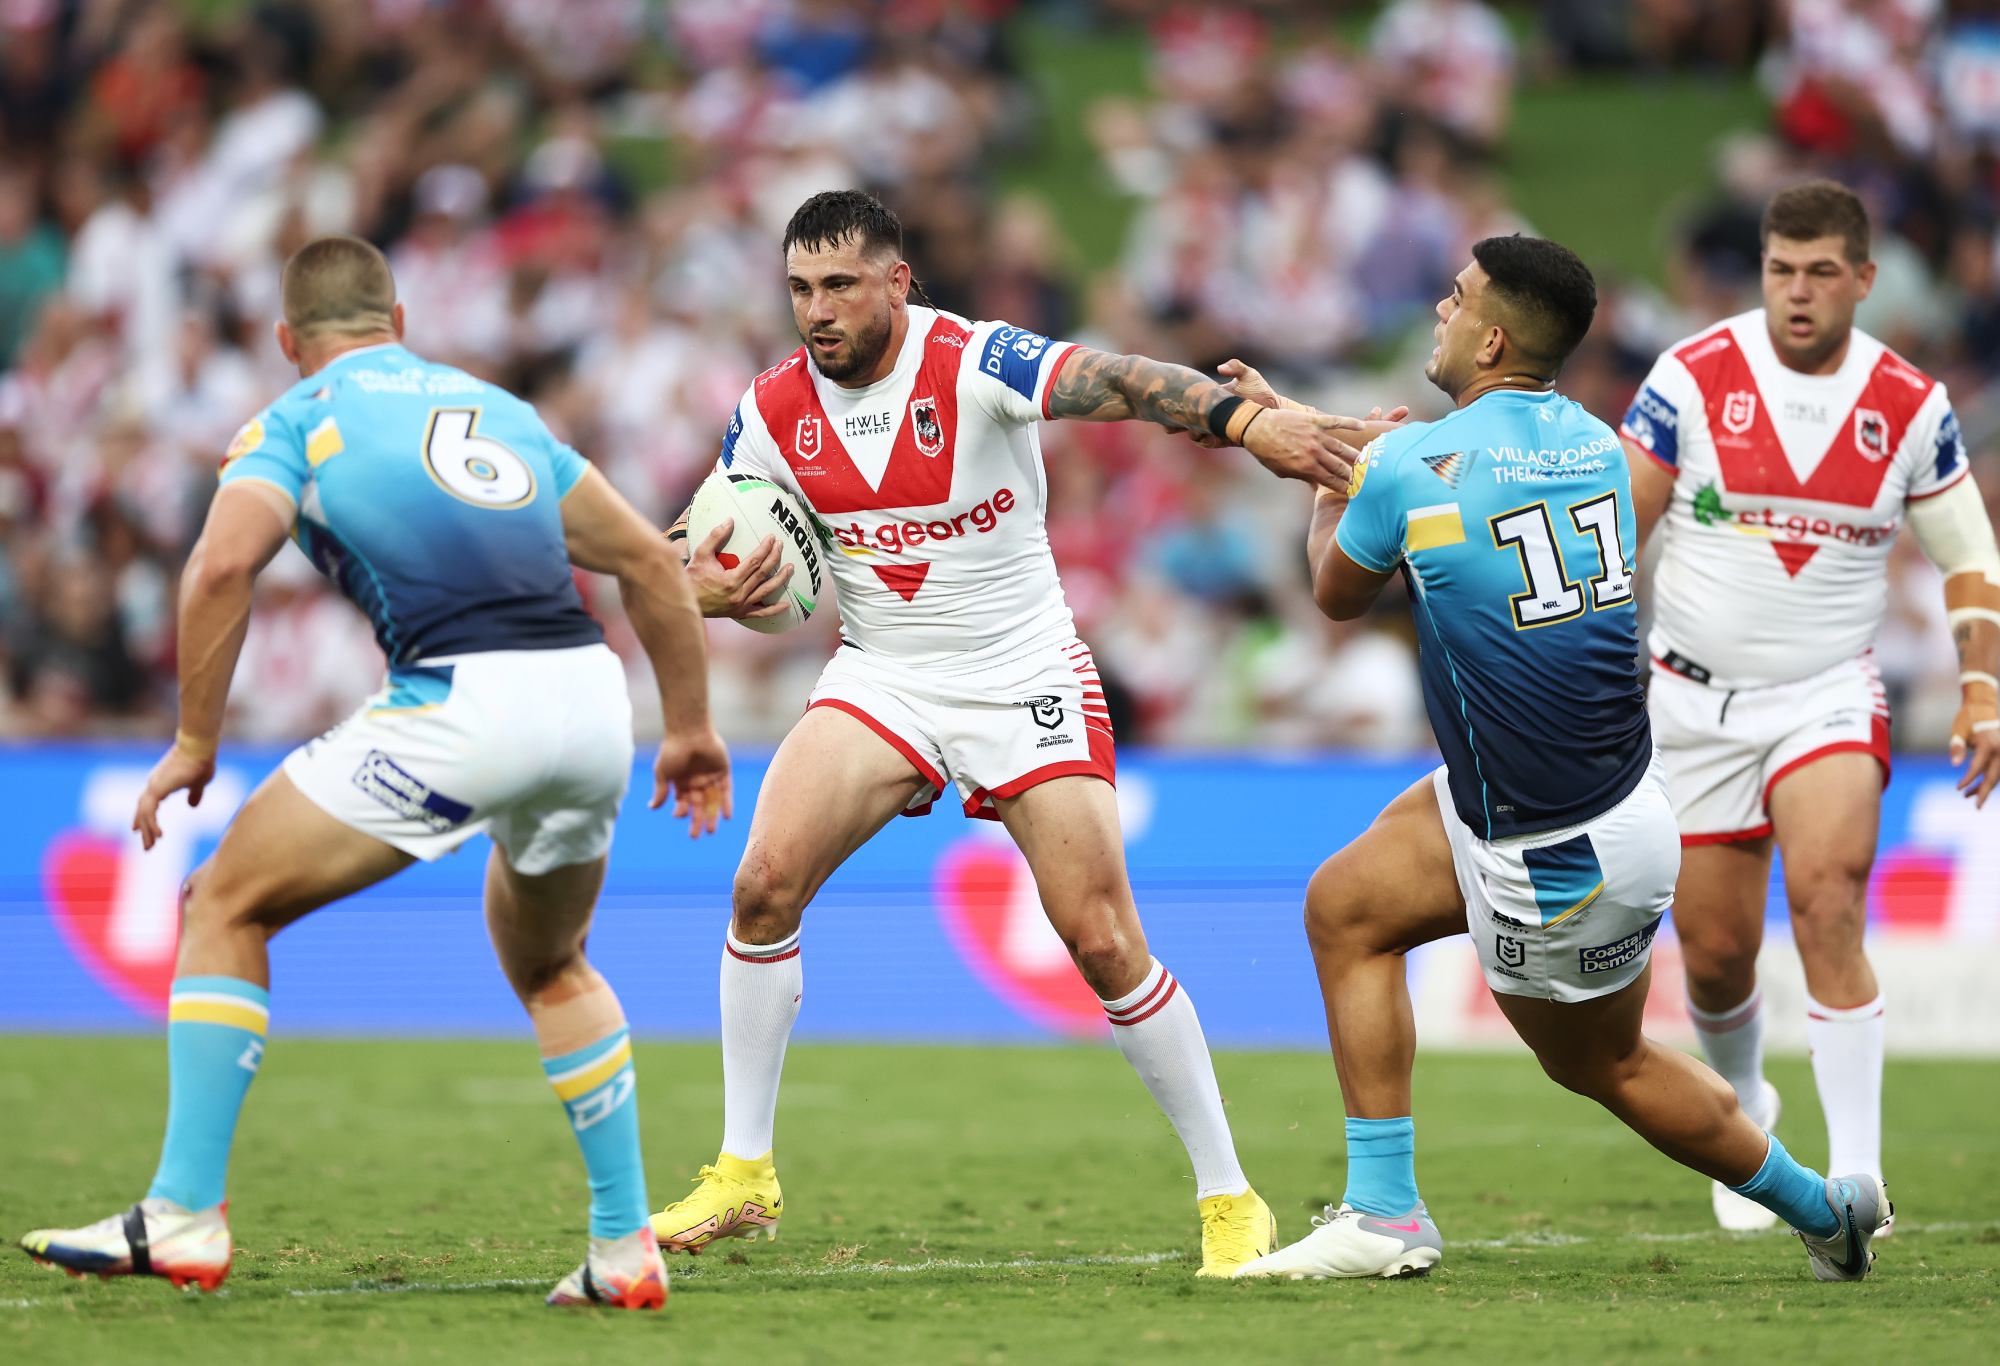 SYDNEY, AUSTRALIA - MARCH 12: Jack Bird of the Dragons is tackled during the NRL Second Round game between the St George Illawarra Dragons and the Gold Coast Titans at Netstrata Jubilee Stadium on March 12, 2023 in Sydney, Australia. (Photo by Matt King/Getty Images)